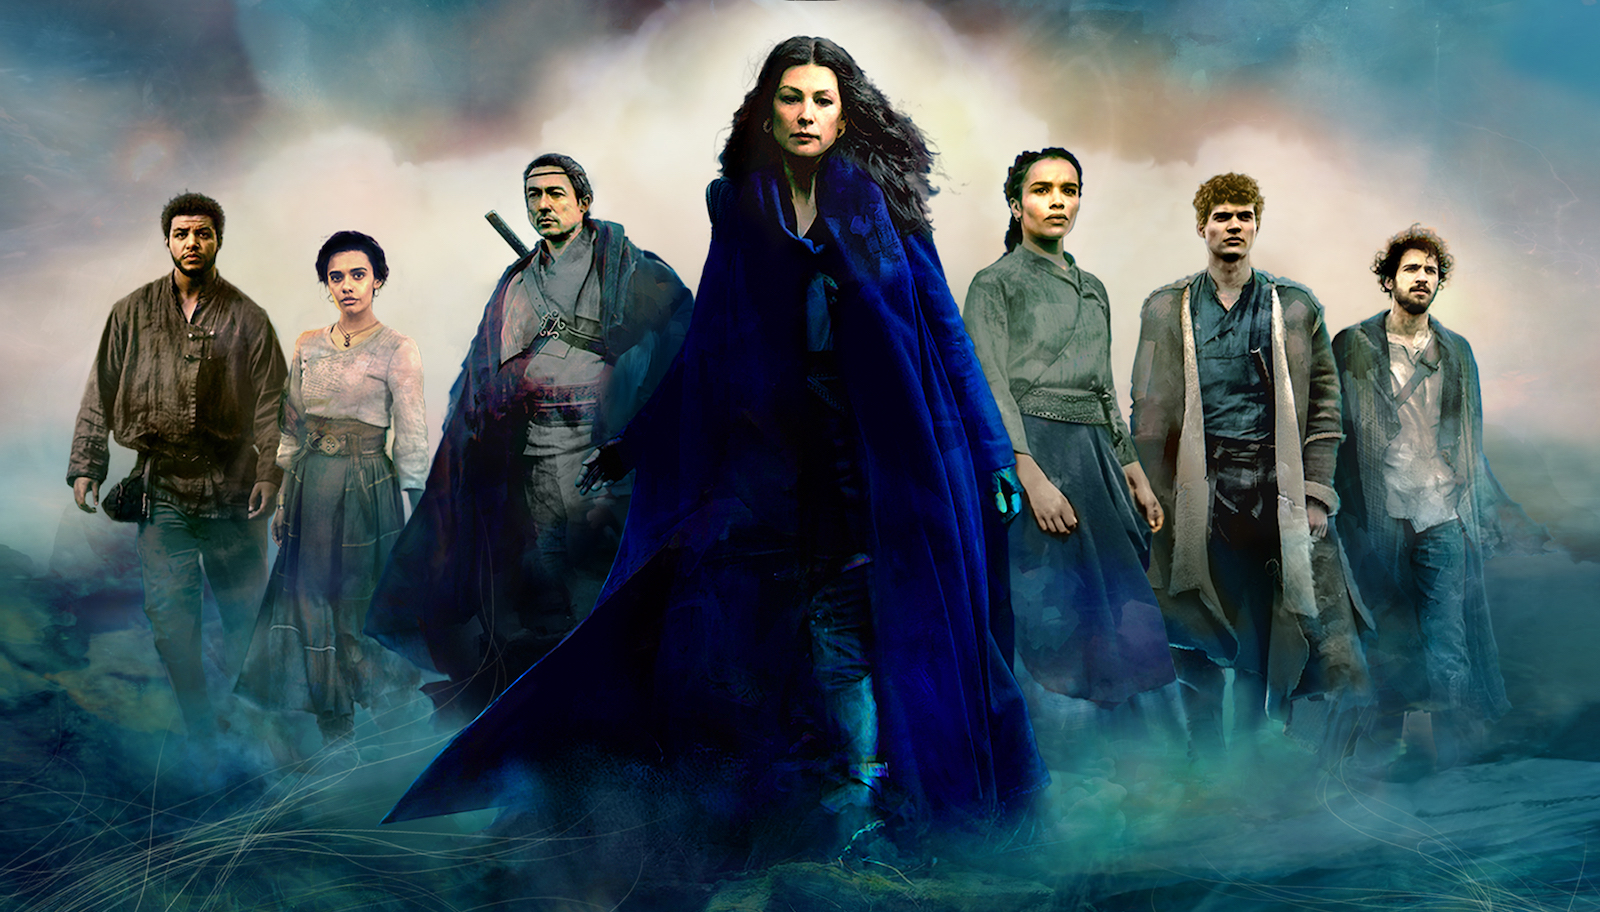 The Wheel of Time Trailer Asks Who Will Defeat the Dark One | Den of Geek